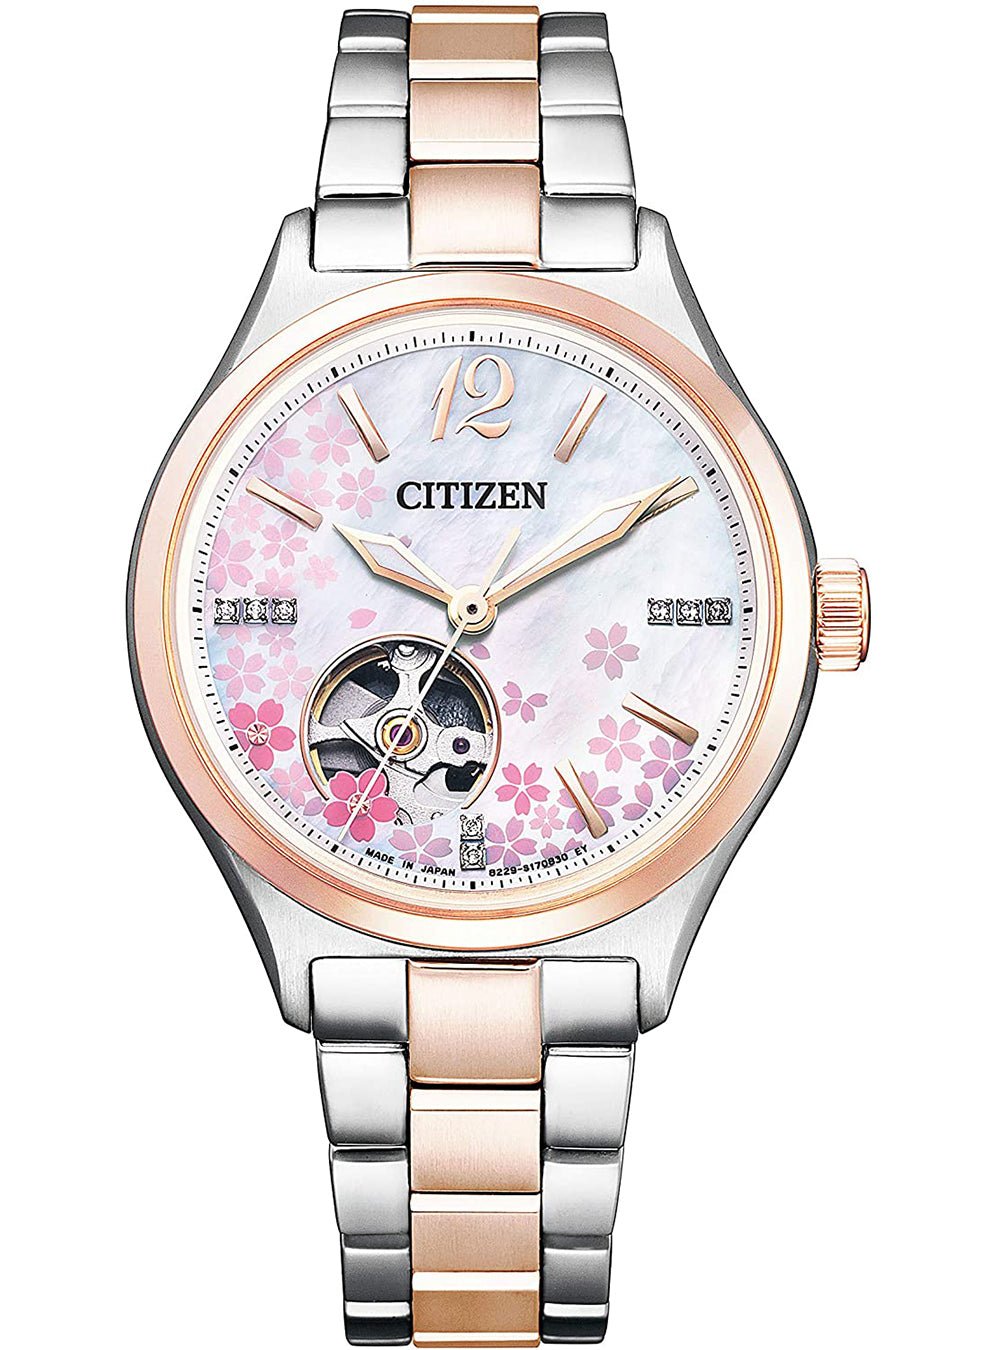 CITIZEN COLLECTION SAKURA LIMITED MODEL PC1014-51D WOMEN'S MADE IN JAPAN JDMWRISTWATCHjapan-select